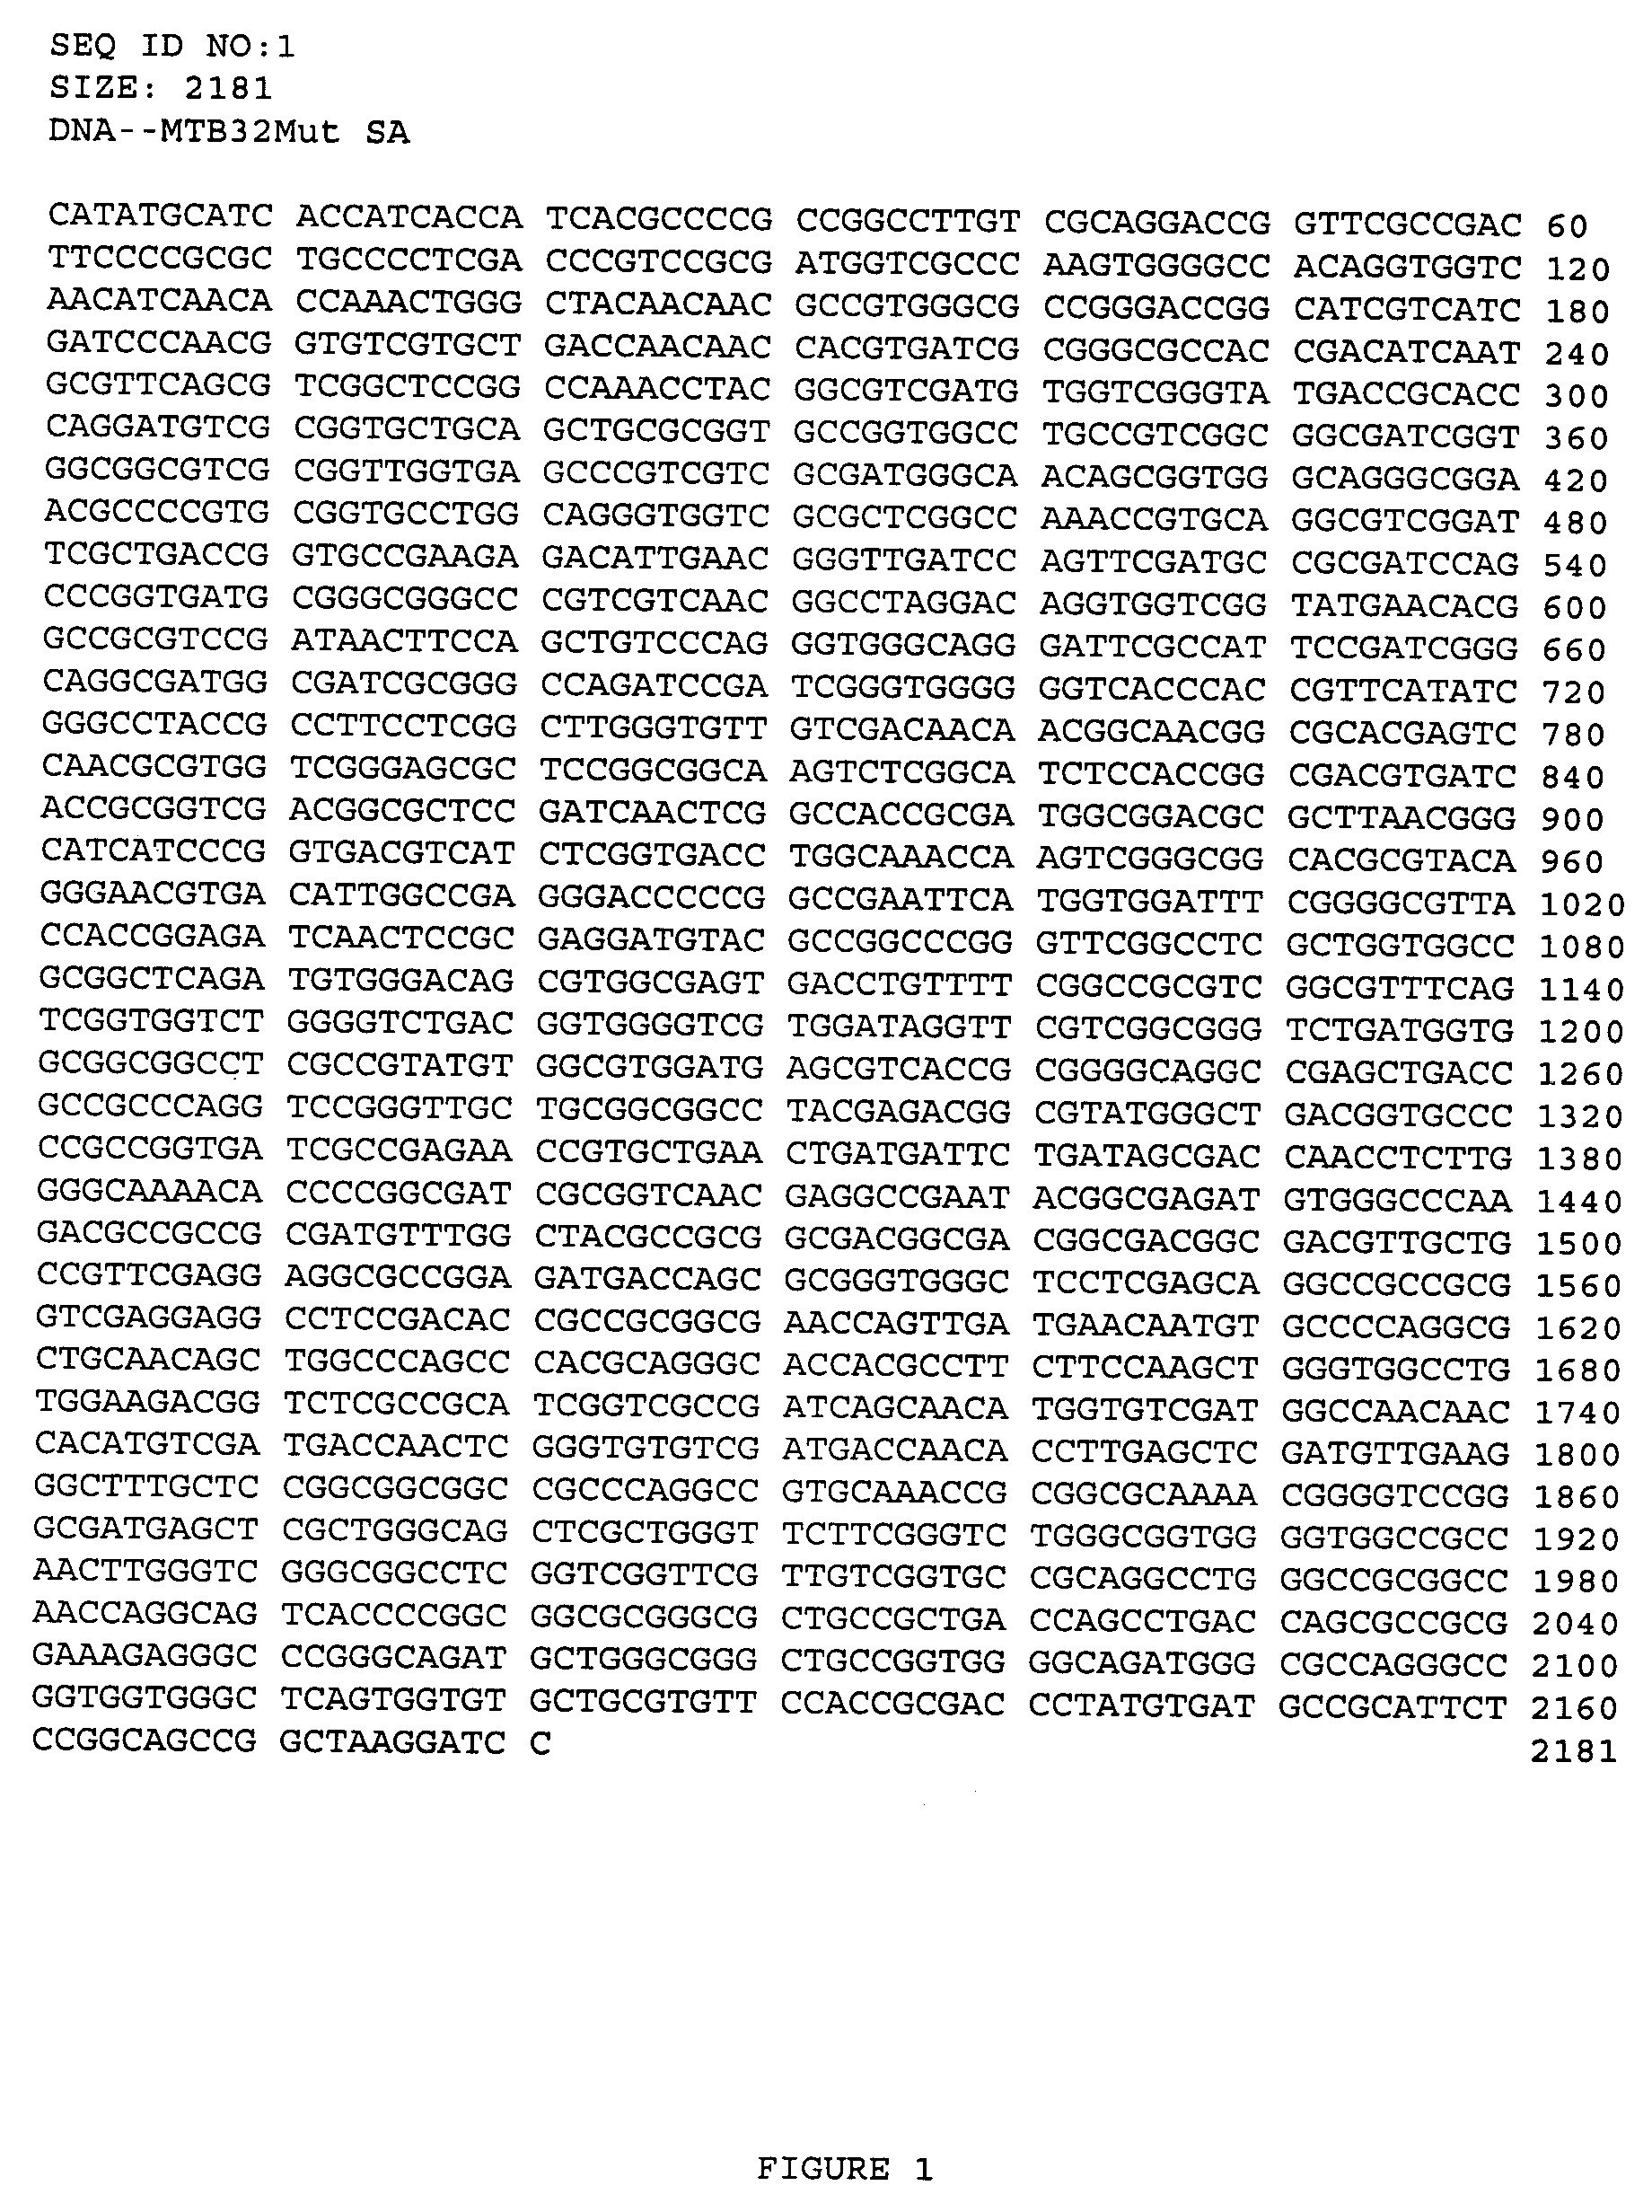 Fusion proteins of <i>Mycobacterium tuberculosis</i>